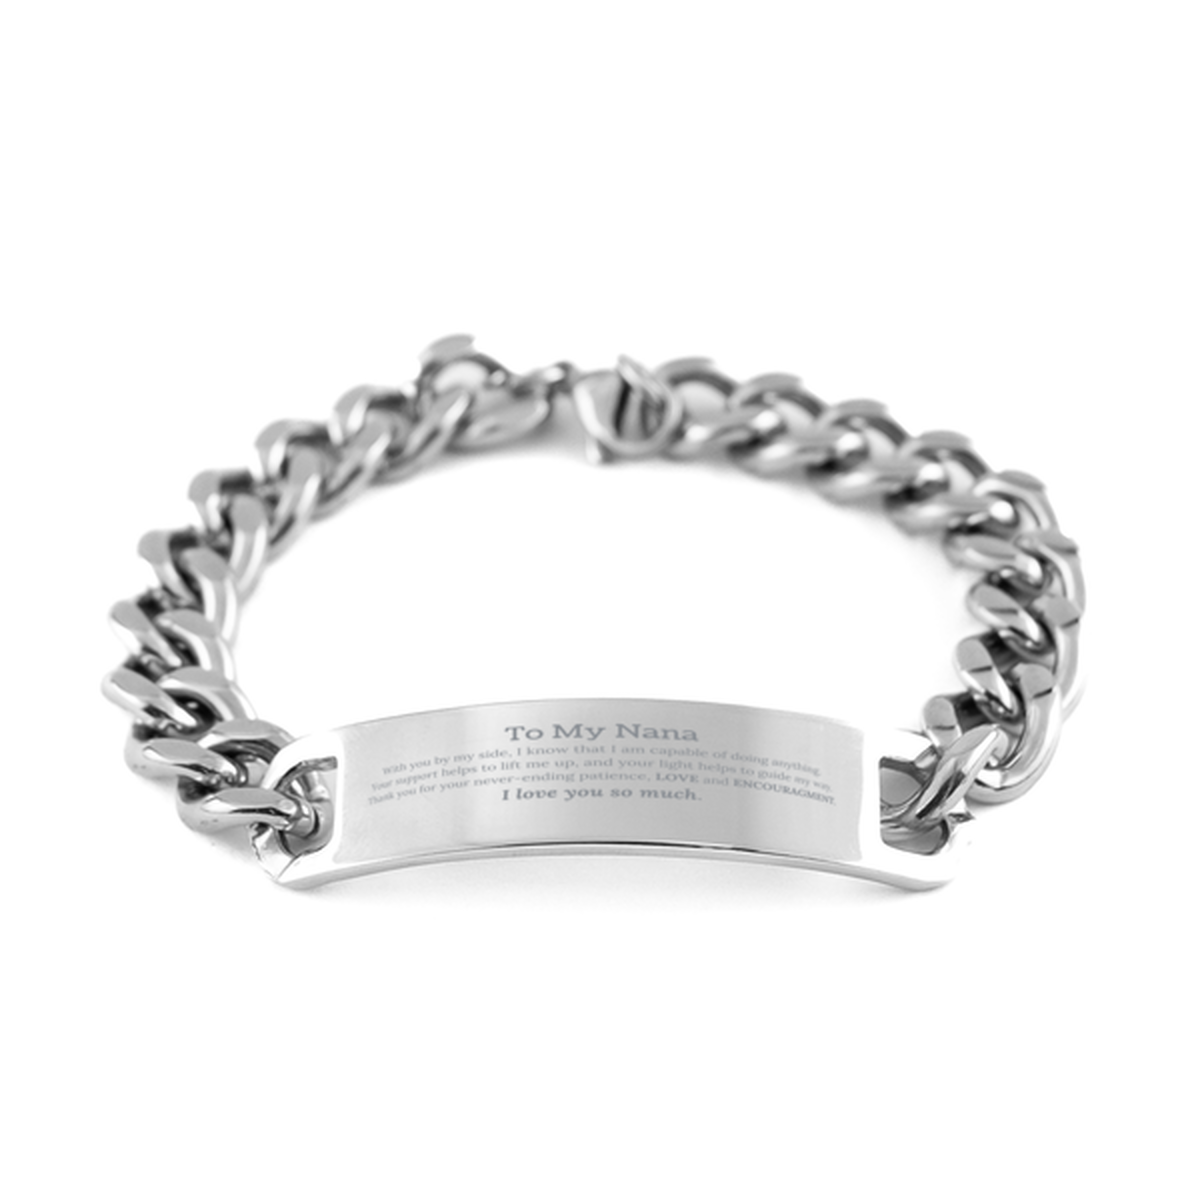 Appreciation Nana Cuban Chain Stainless Steel Bracelet Gifts, To My Nana Birthday Christmas Wedding Keepsake Gifts for Nana With you by my side, I know that I am capable of doing anything. I love you so much